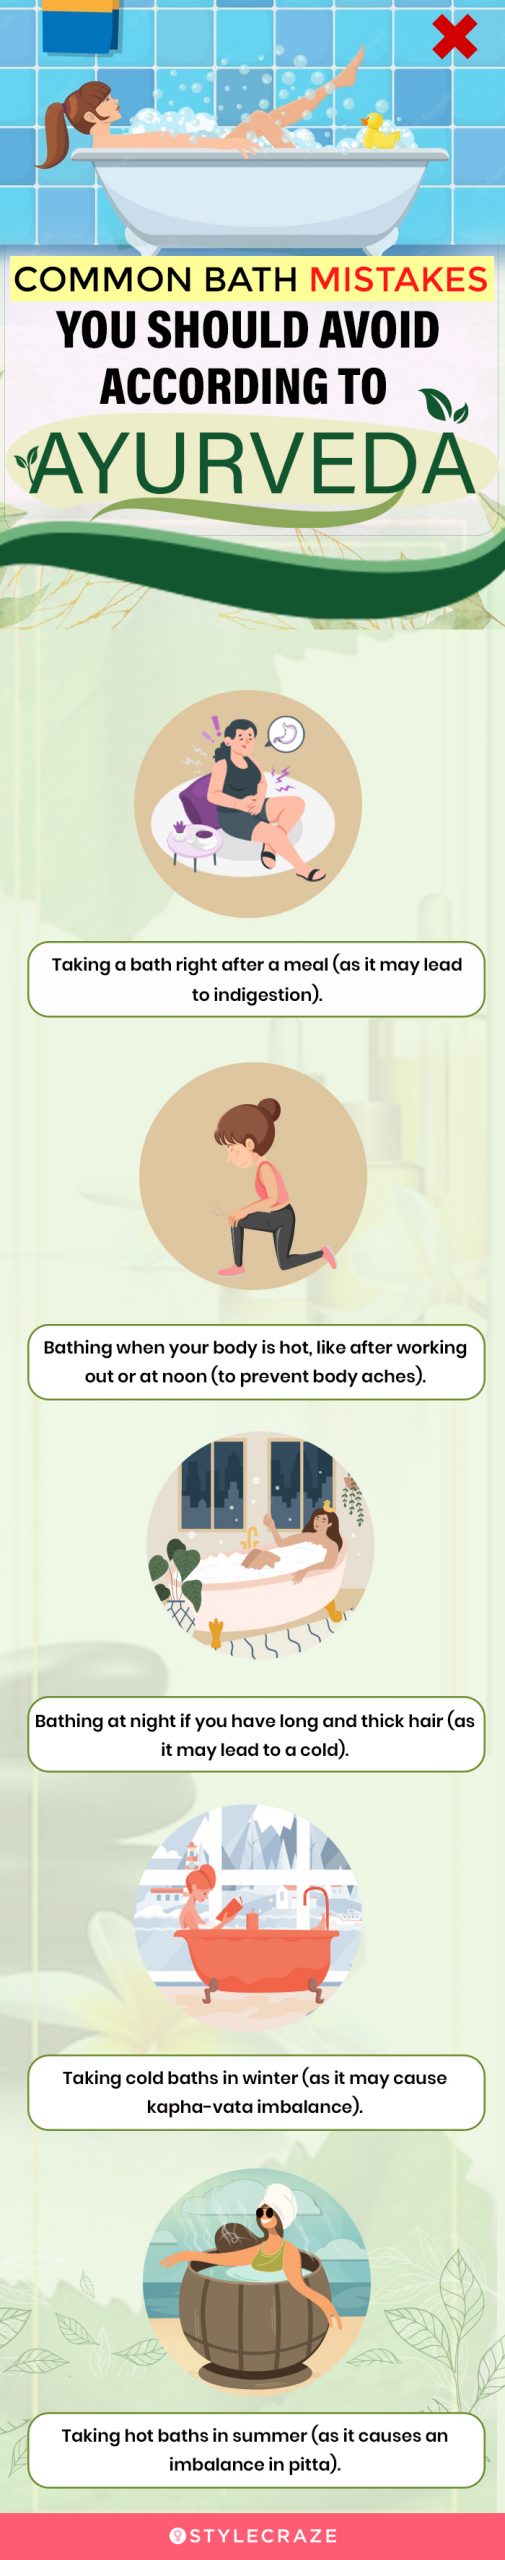 common bath mistakes you should avoid according to ayurveda [infographic]